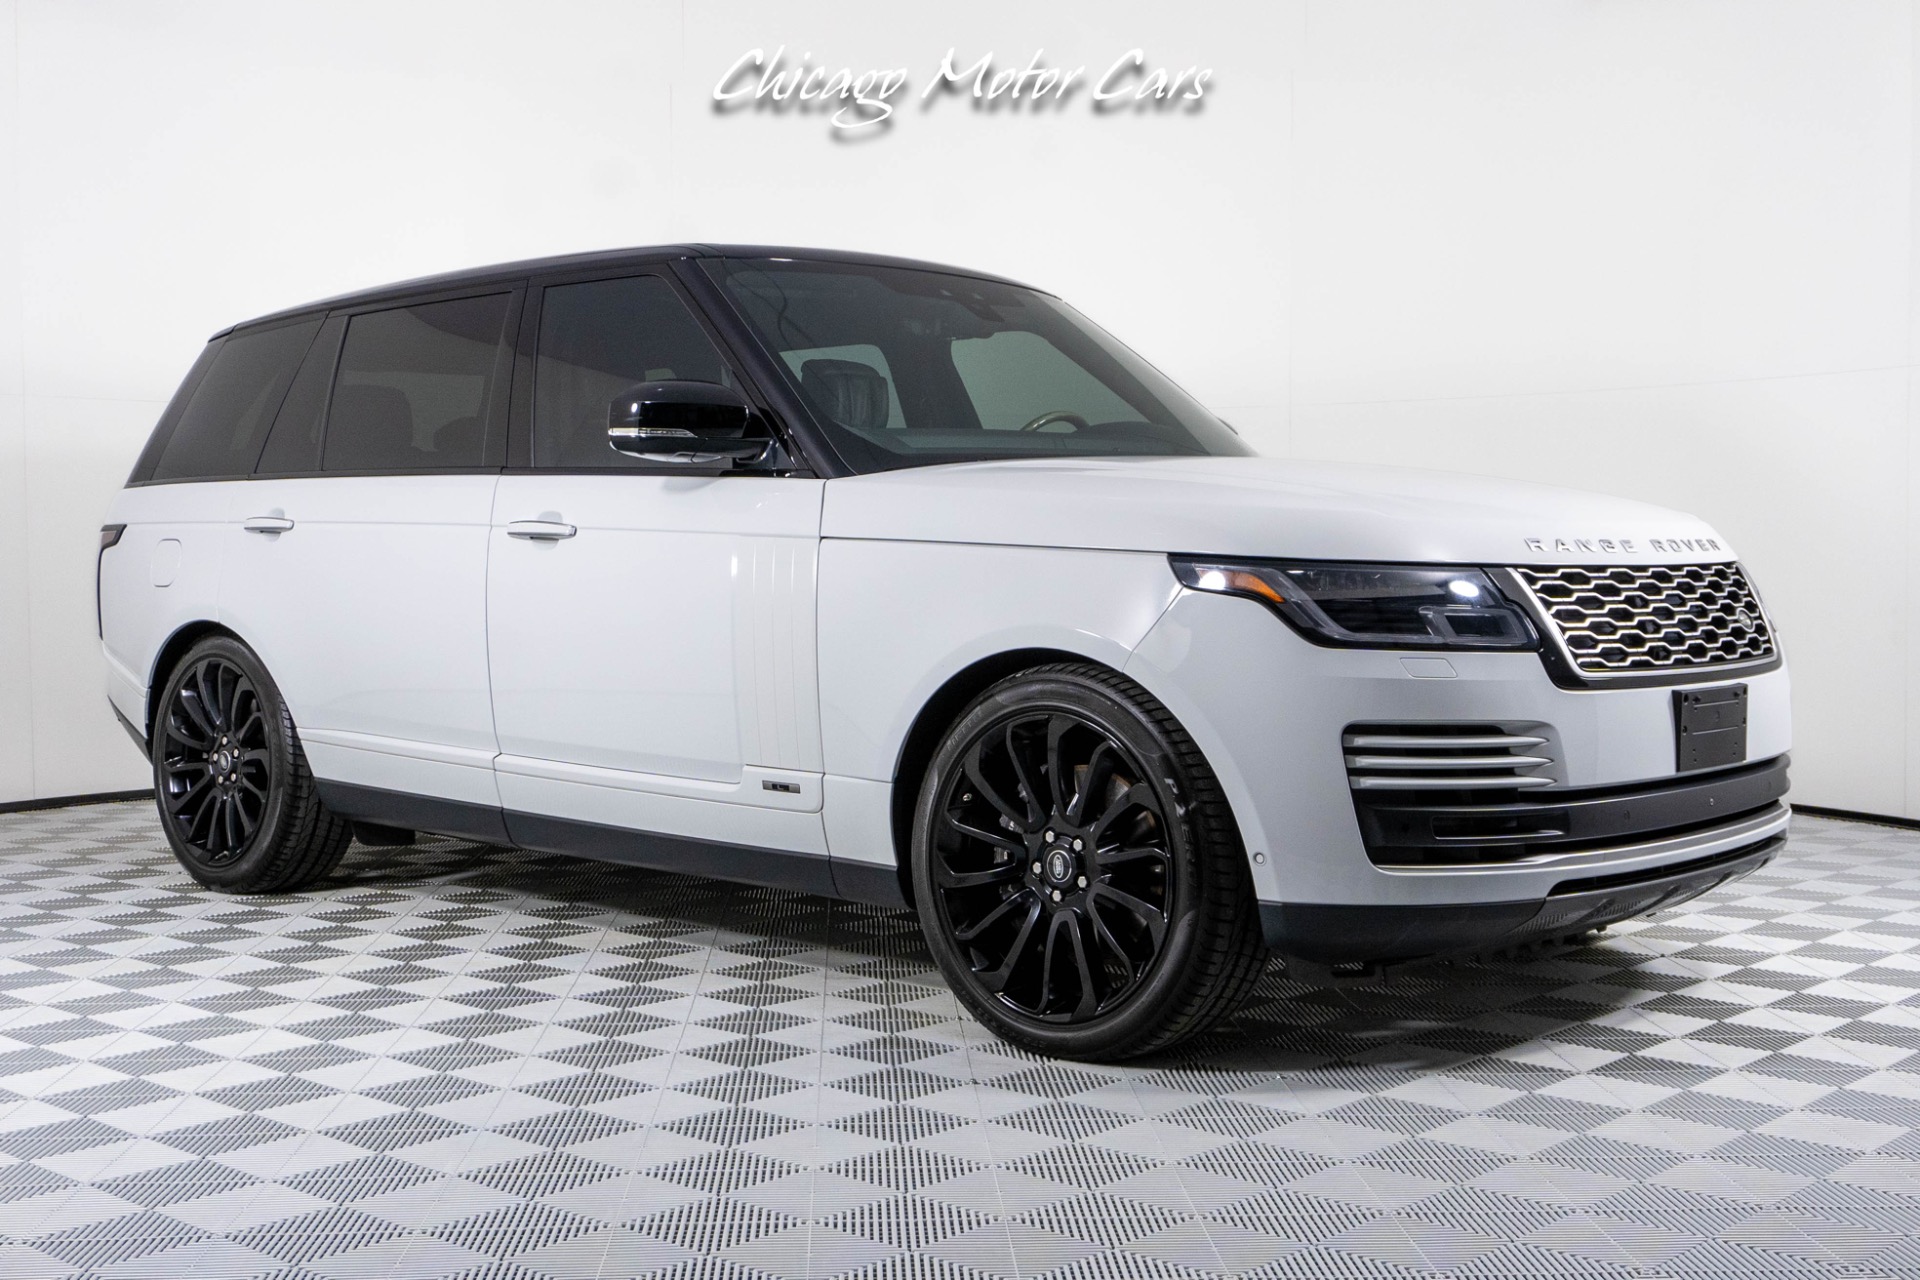 Used-2018-Land-Rover-Range-Rover-Autobiography-LWB-Black-Contrast-Roof-22-Wheels-W-Diamond-Turned-Finish